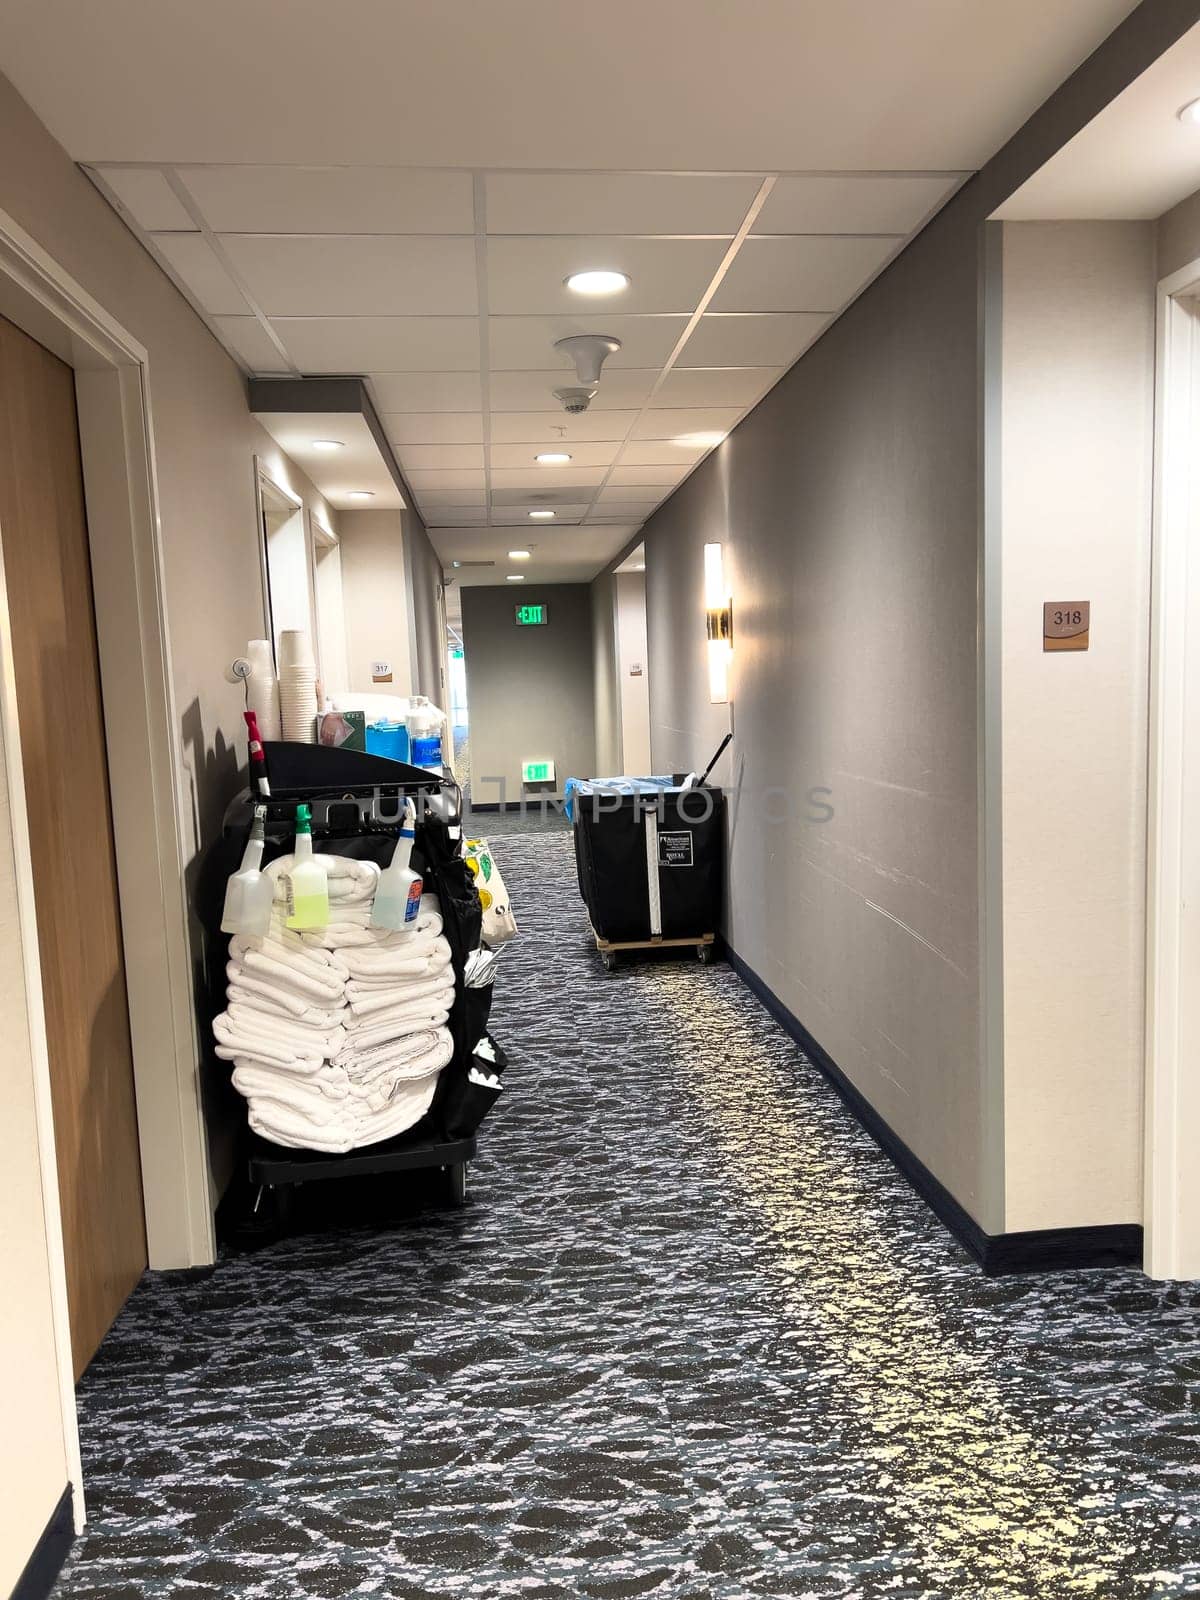 Hotel Hallway Cleaning Service: Ensuring a Sparkling, Welcoming Environment by arinahabich